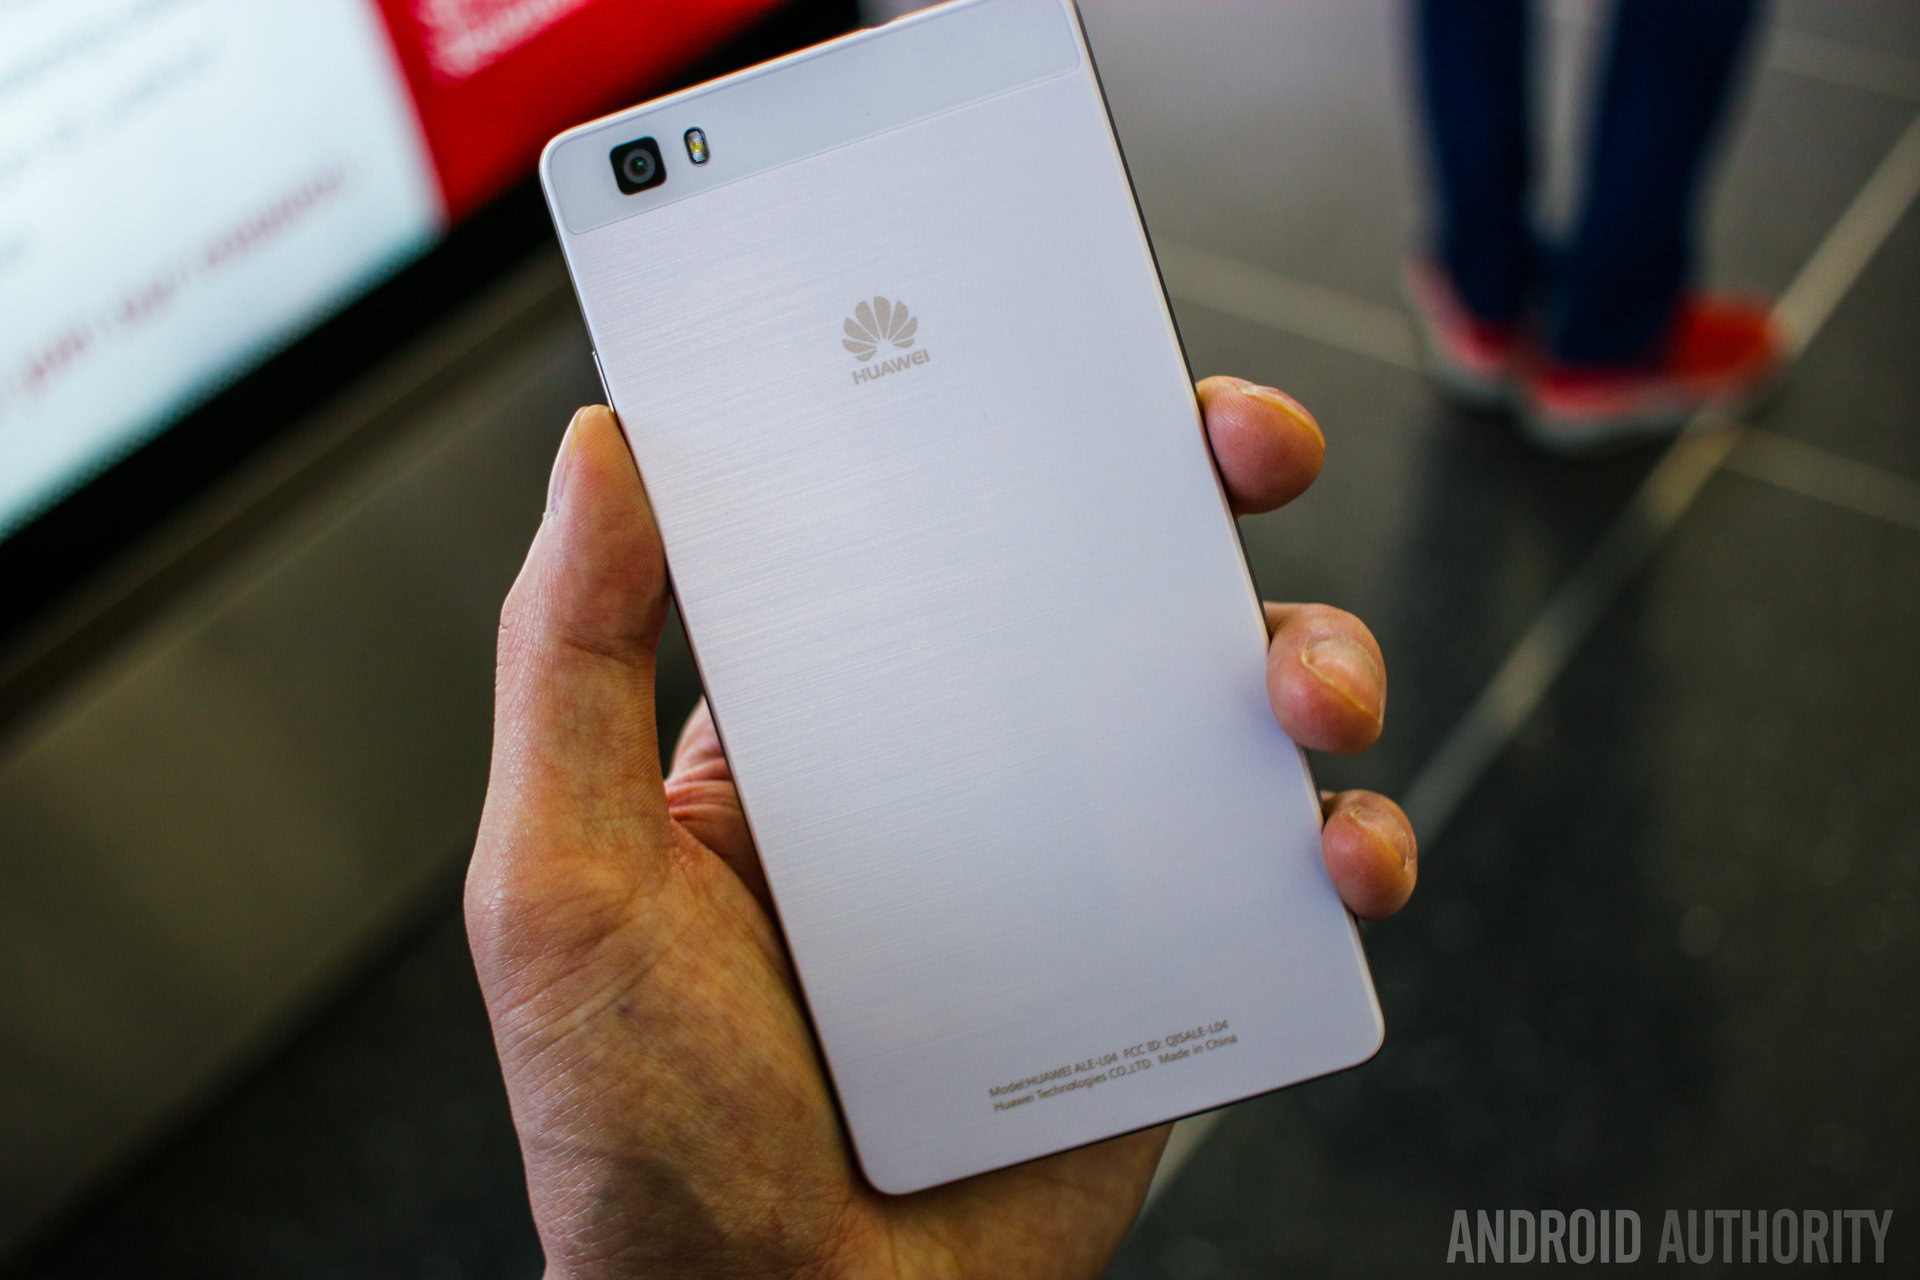 Trouwens toeter Birma HUAWEI P8 Lite Hands on and First Impressions